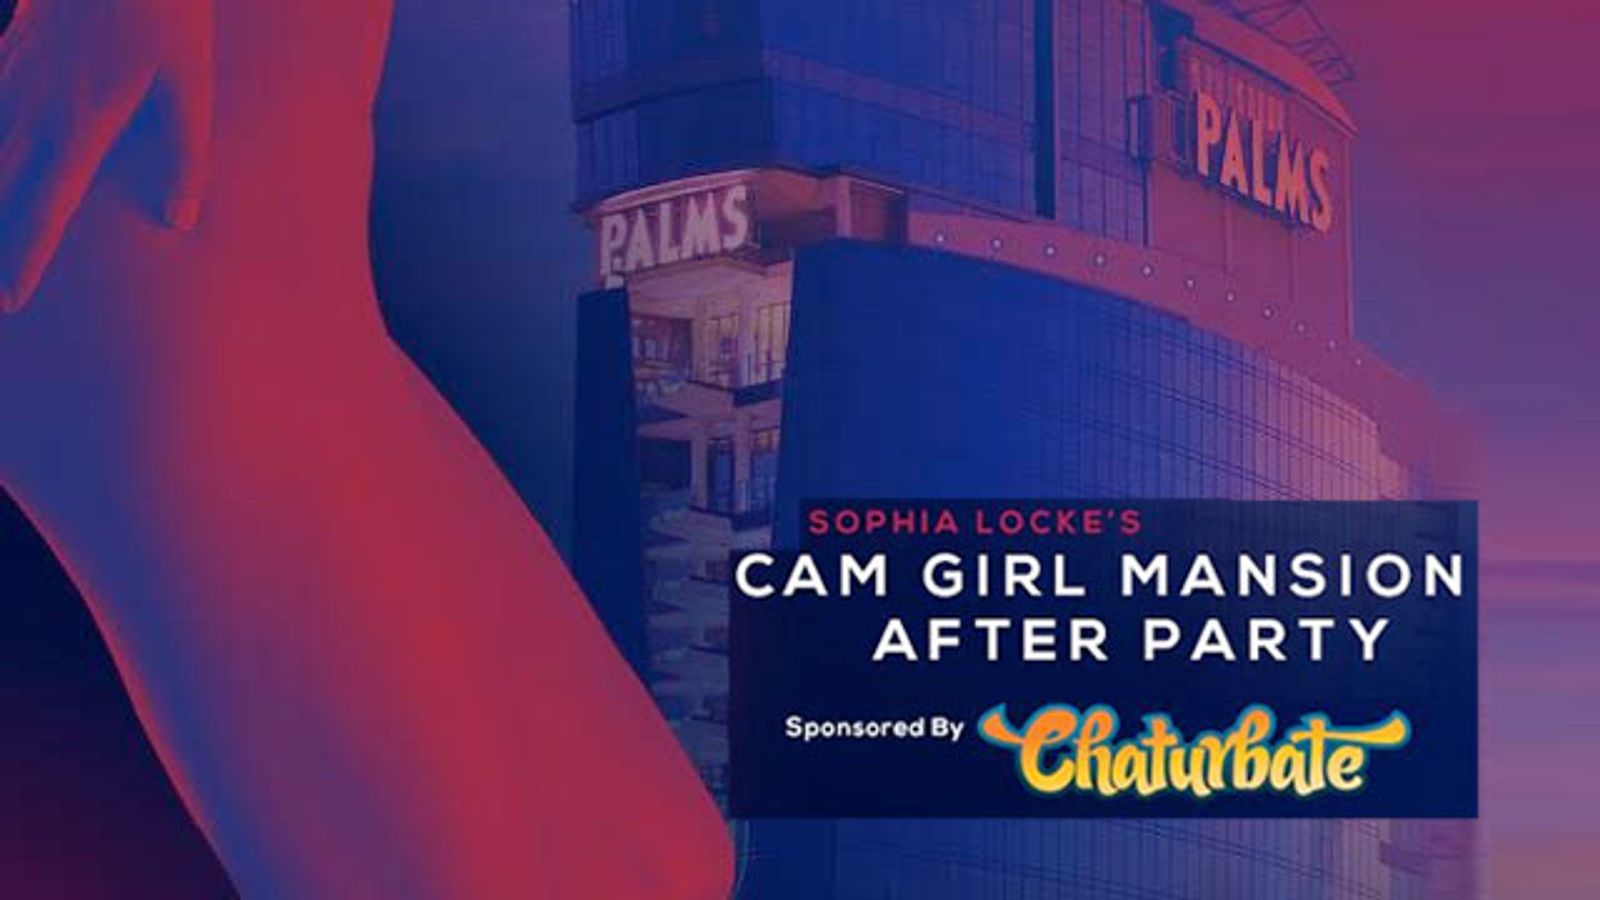 Chaturbate Co-Sponsors Cam Girl Mansion After Party January 23